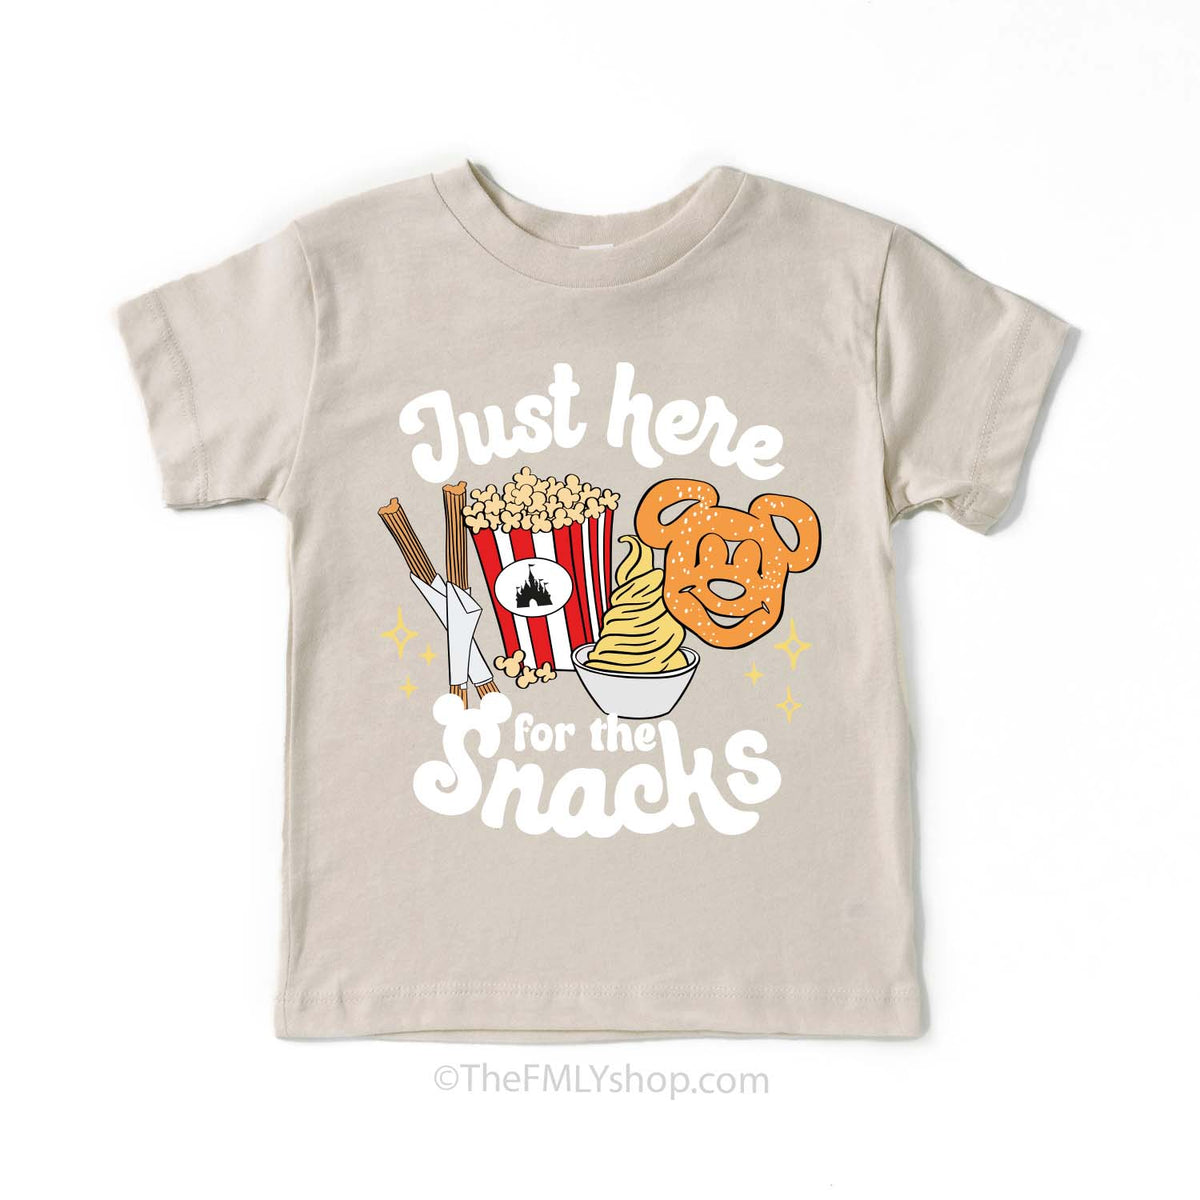 Just Here for the Snacks Tee, Kids Size